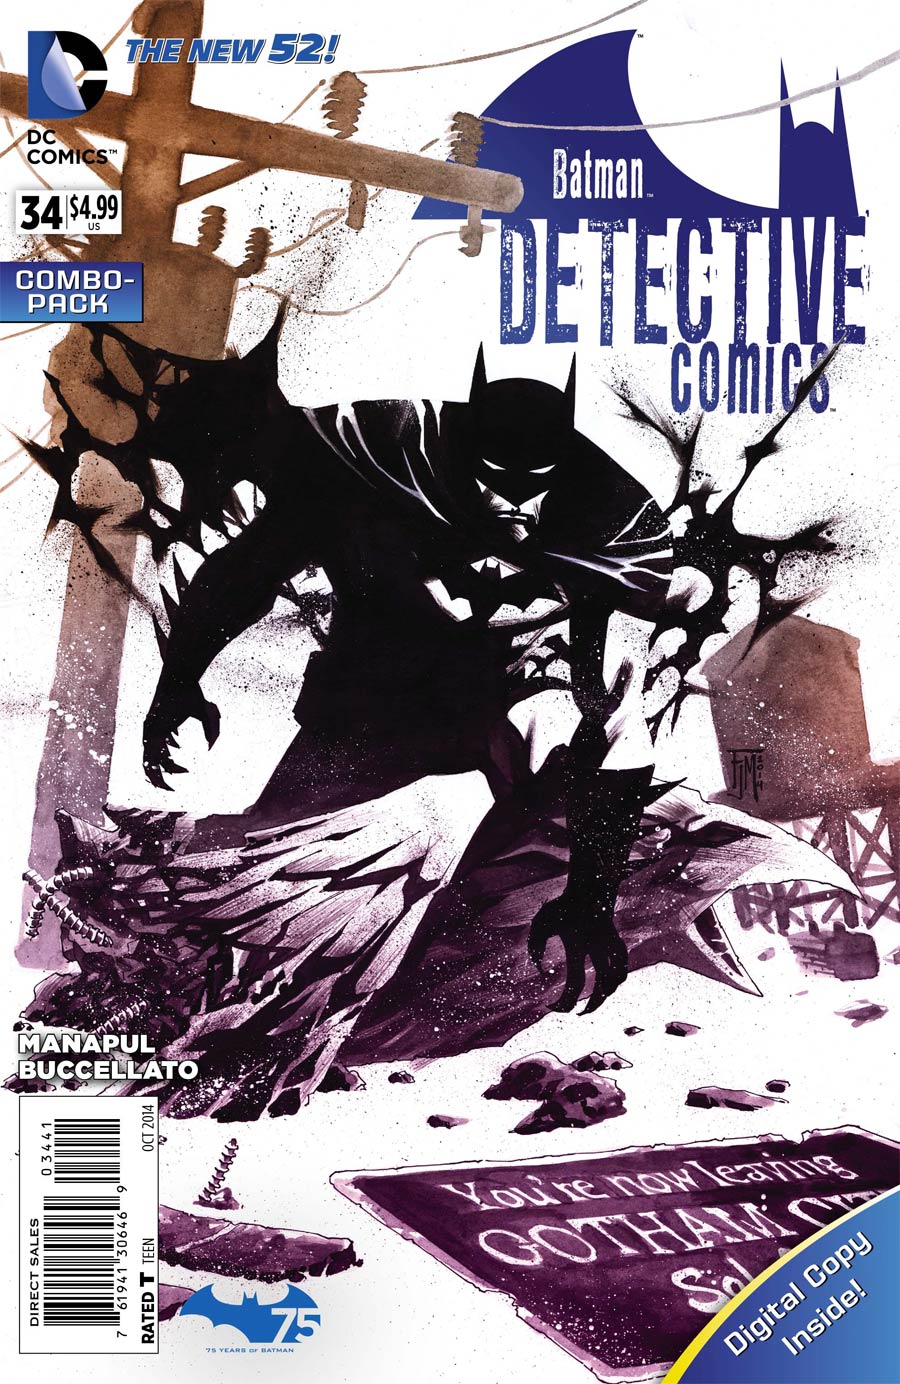 Detective Comics Vol 2 #34 Cover D Combo Pack Without Polybag